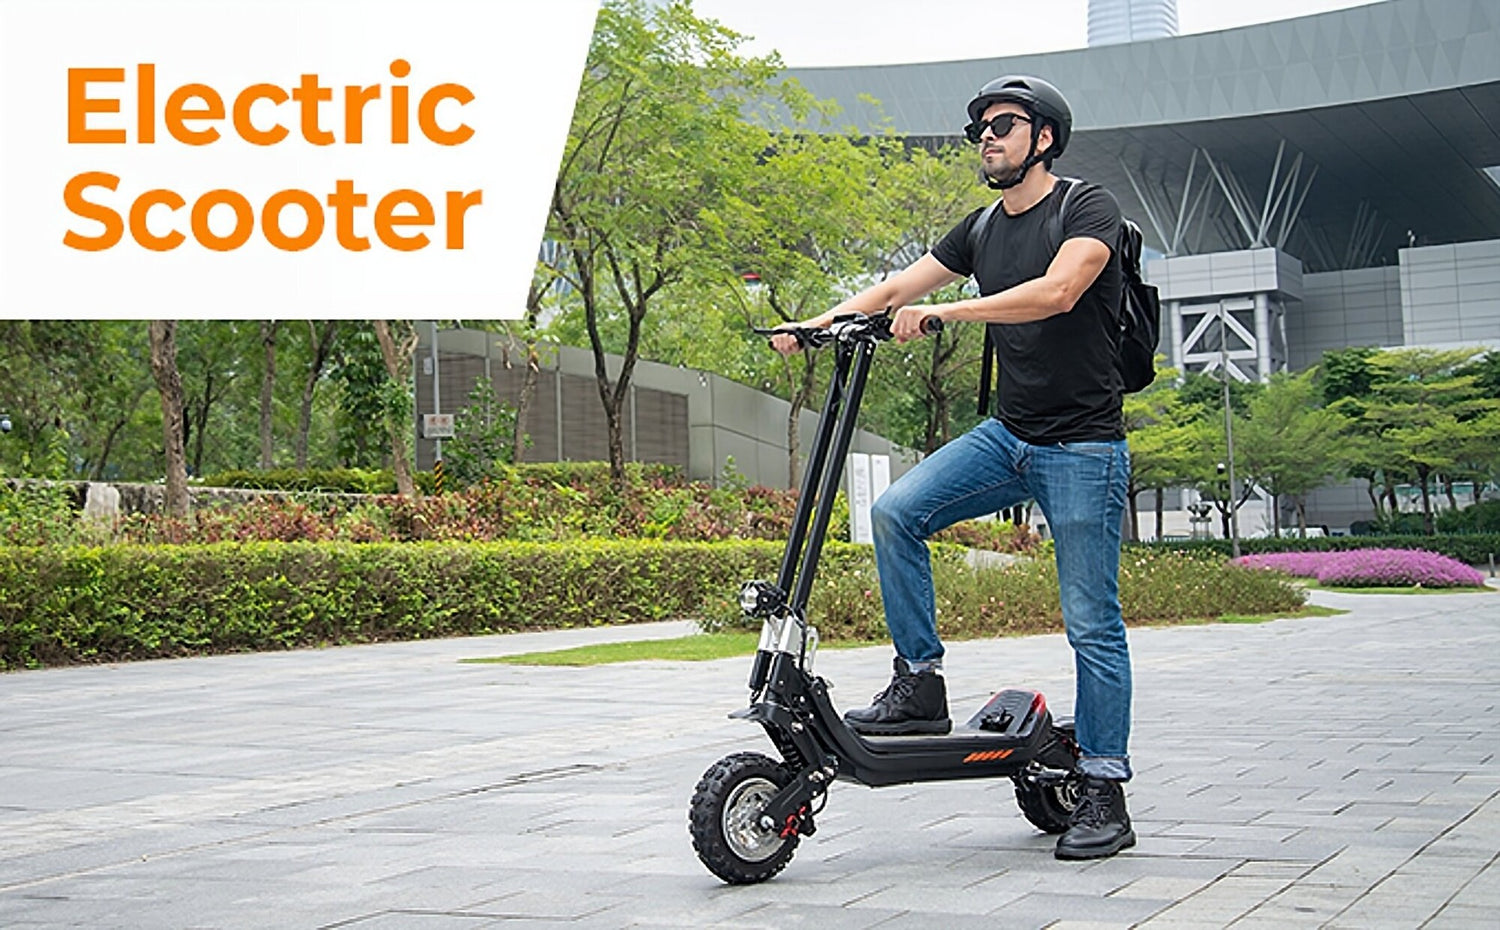 The Ultimate Guide to Off-Roading with Your Electric Scooter